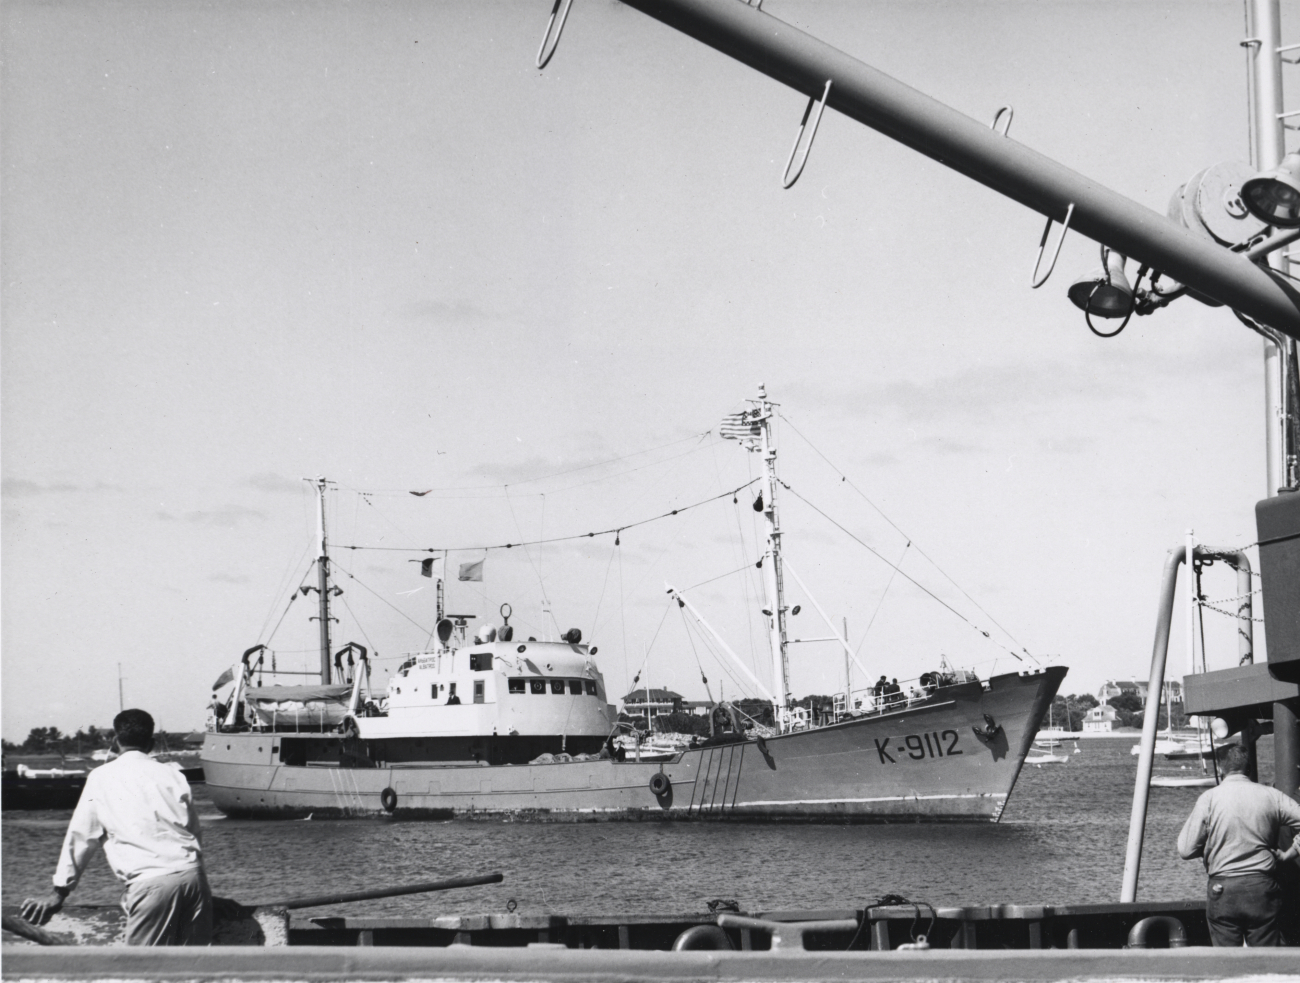 The Soviet Research vessel ALBATROS arriving in Woods Hole